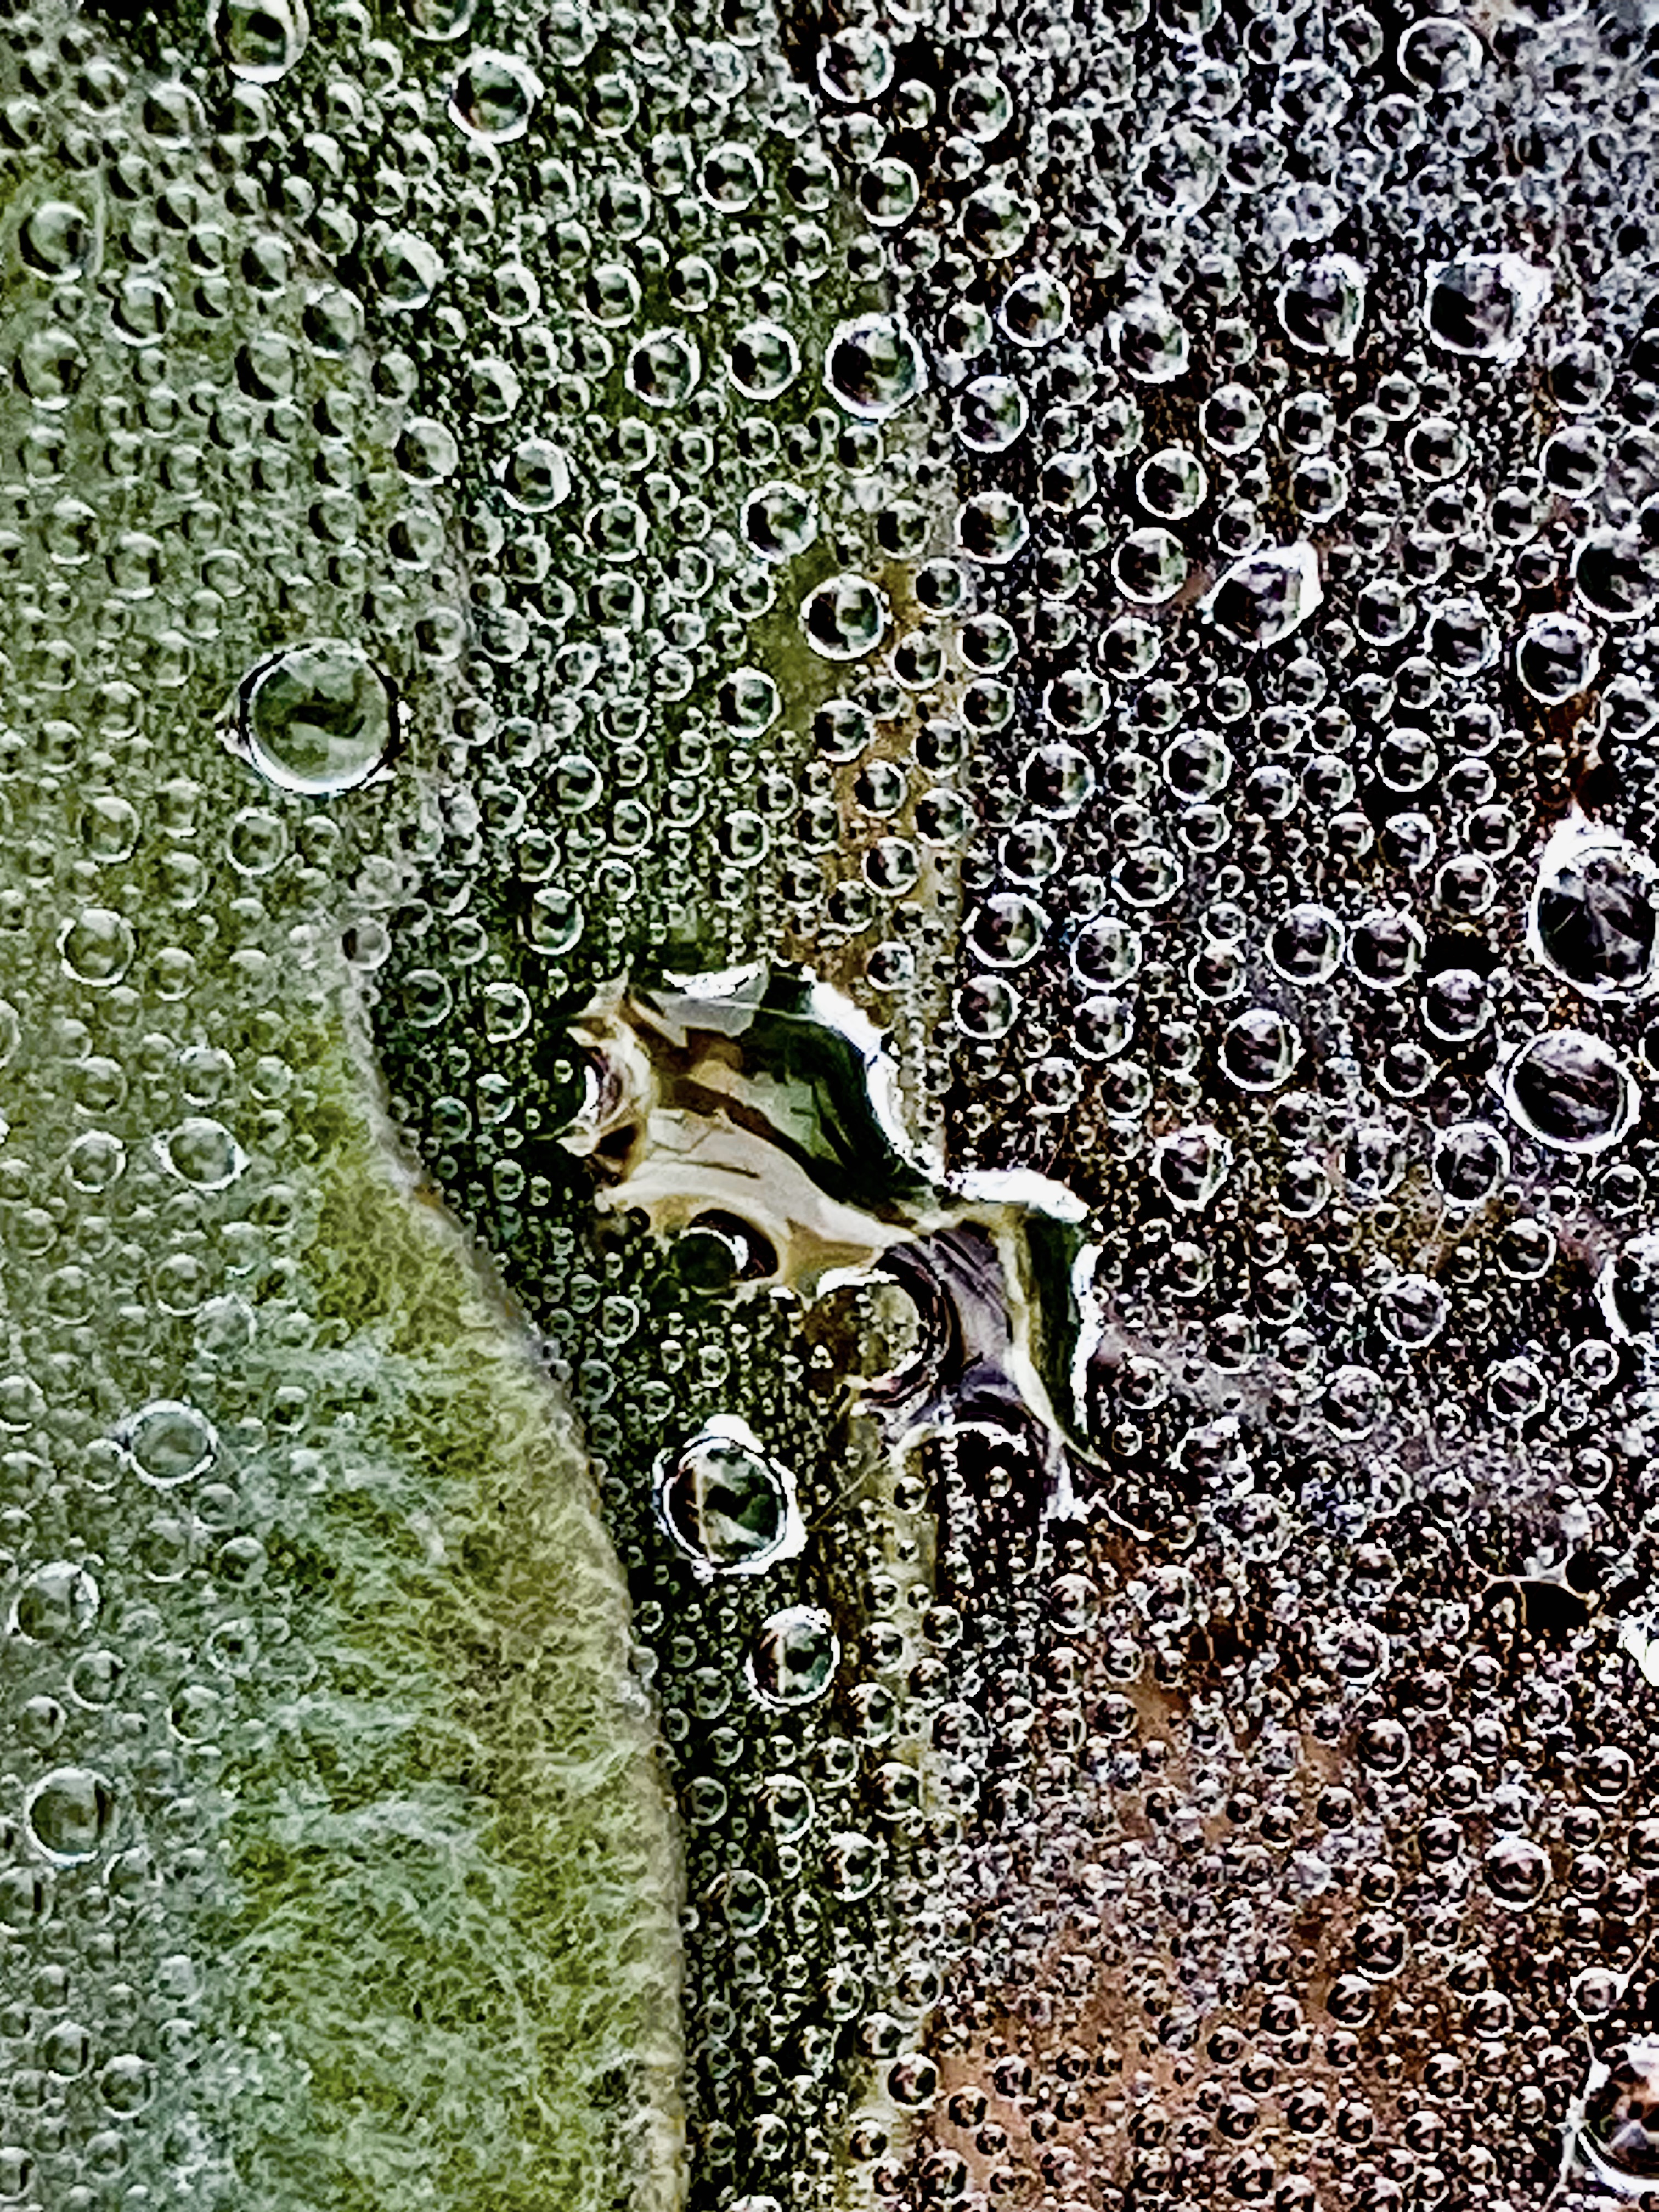 "Early Morning Dew" © Sanford T. Rose; used by permission]